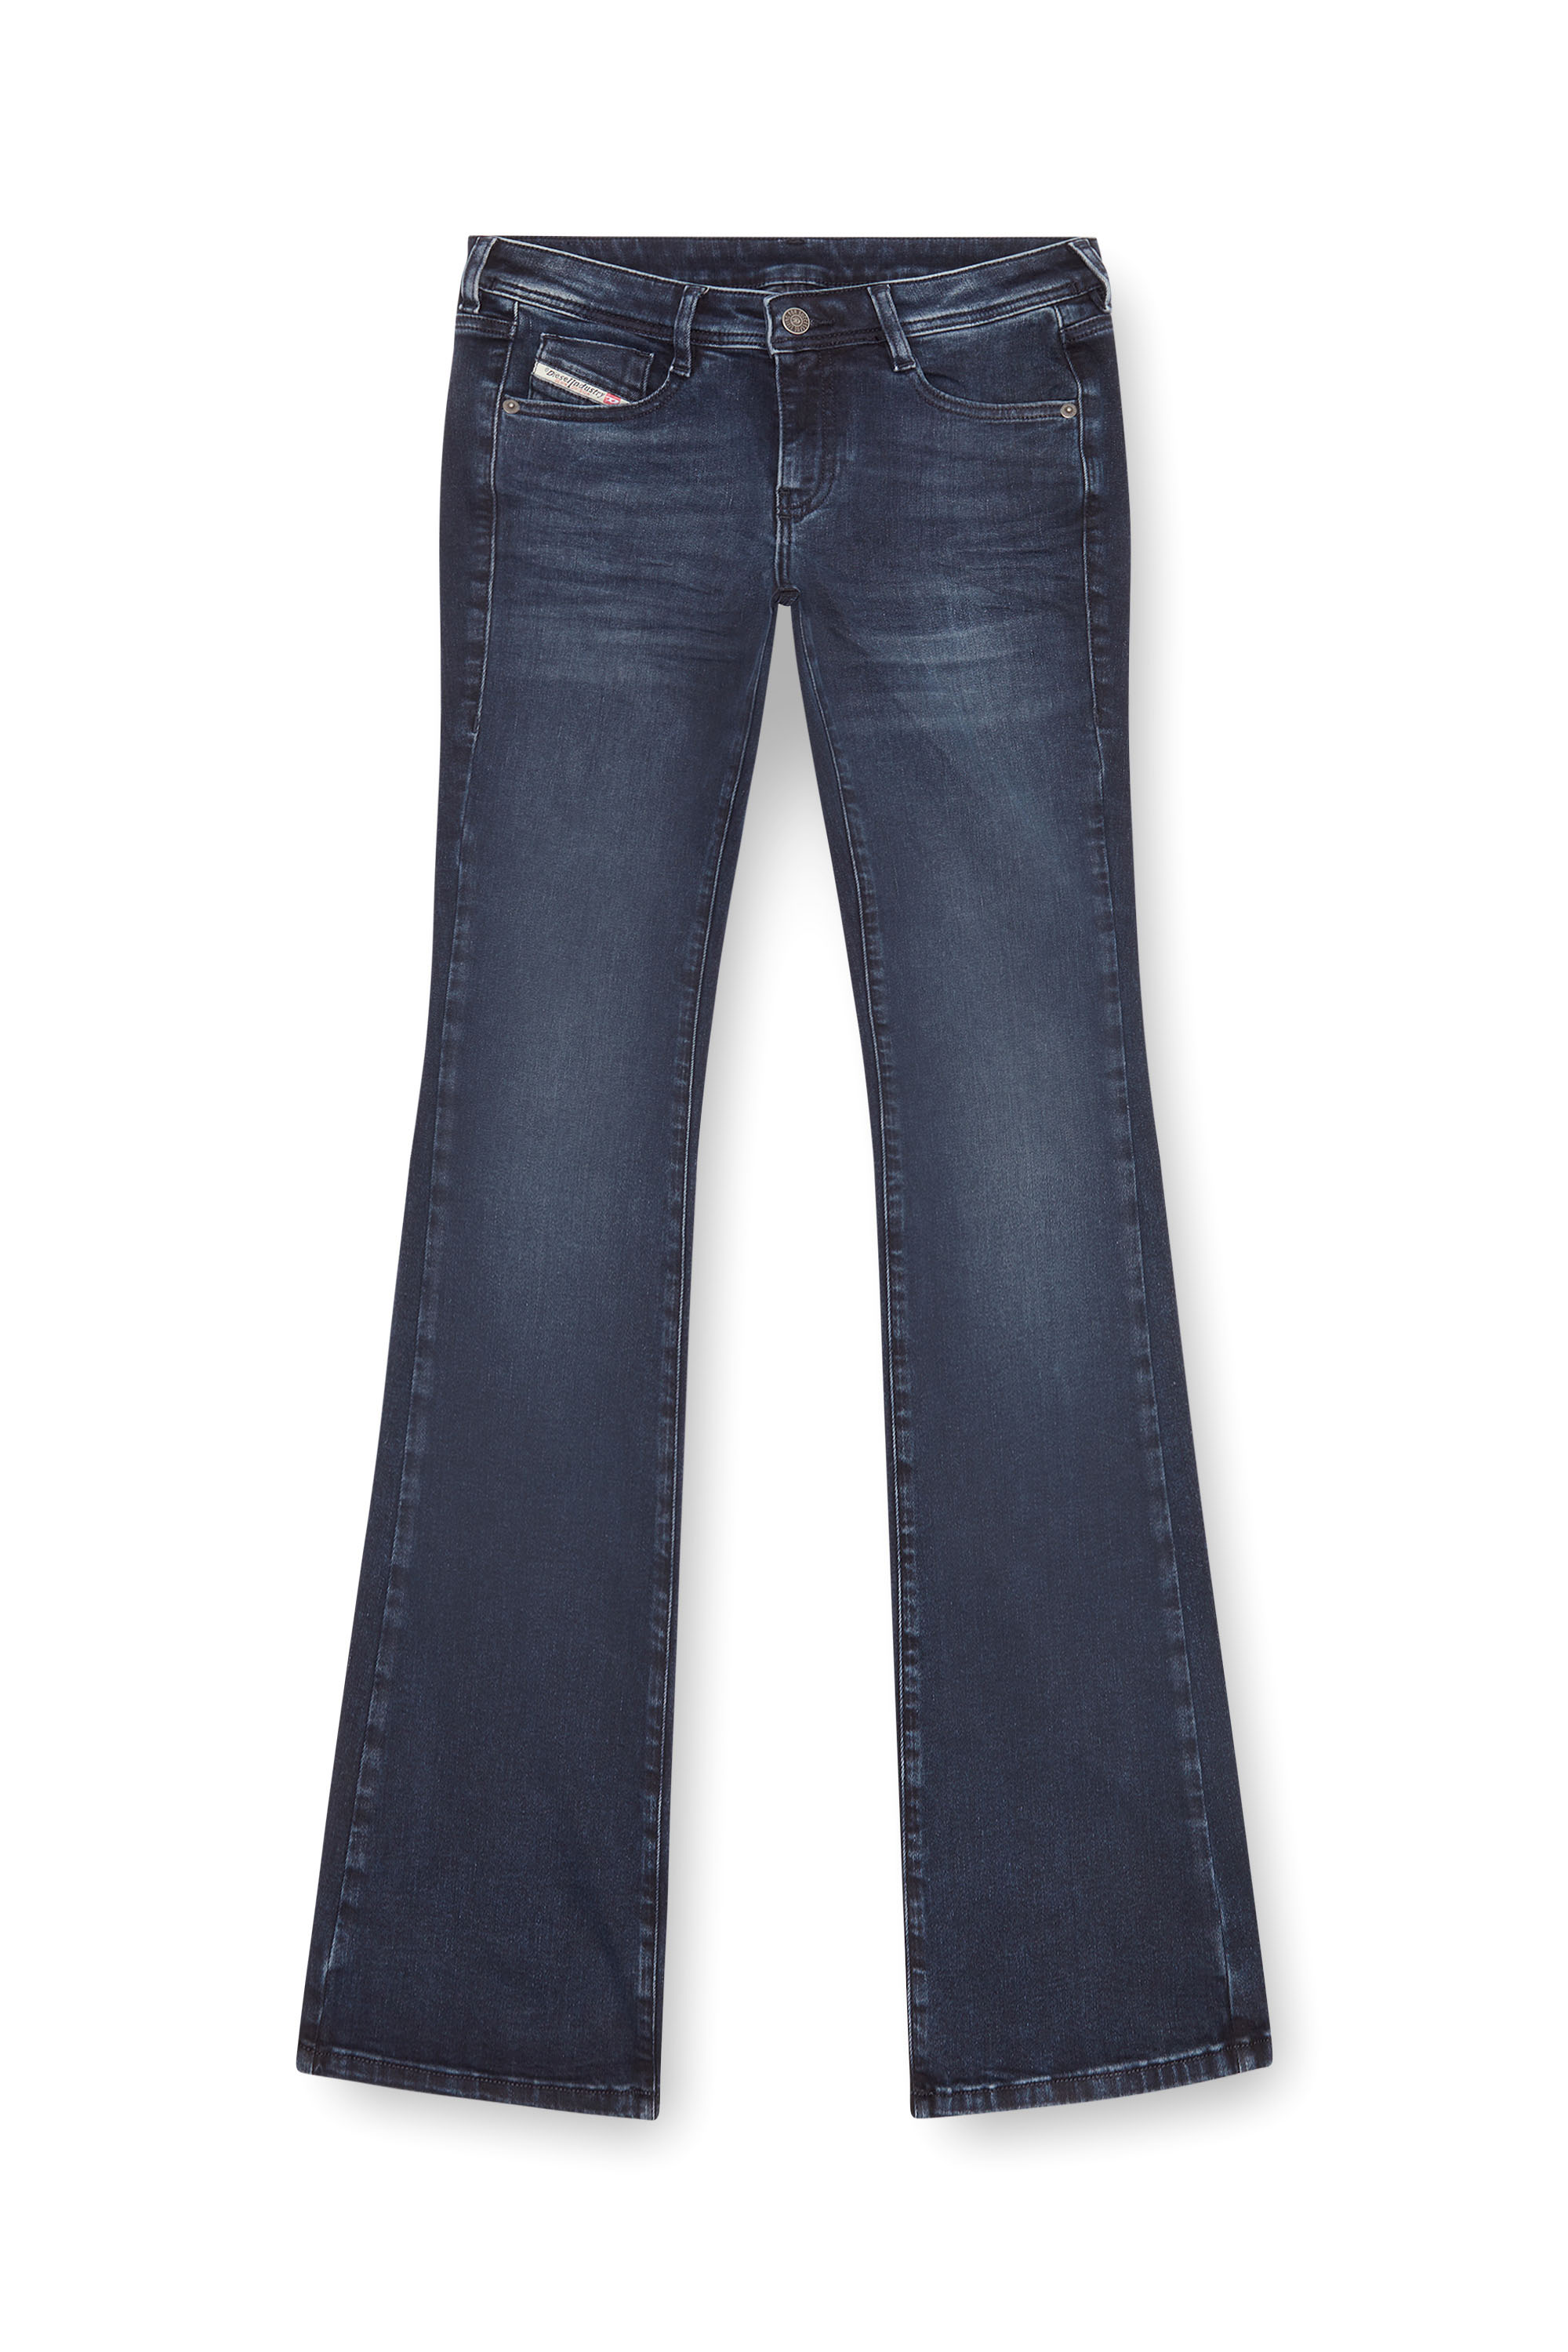 Diesel - Bootcut and Flare Jeans 1969 D-Ebbey 0ENAR, Mujer Bootcut y Flare Jeans - 1969 D-Ebbey in Azul marino - Image 5